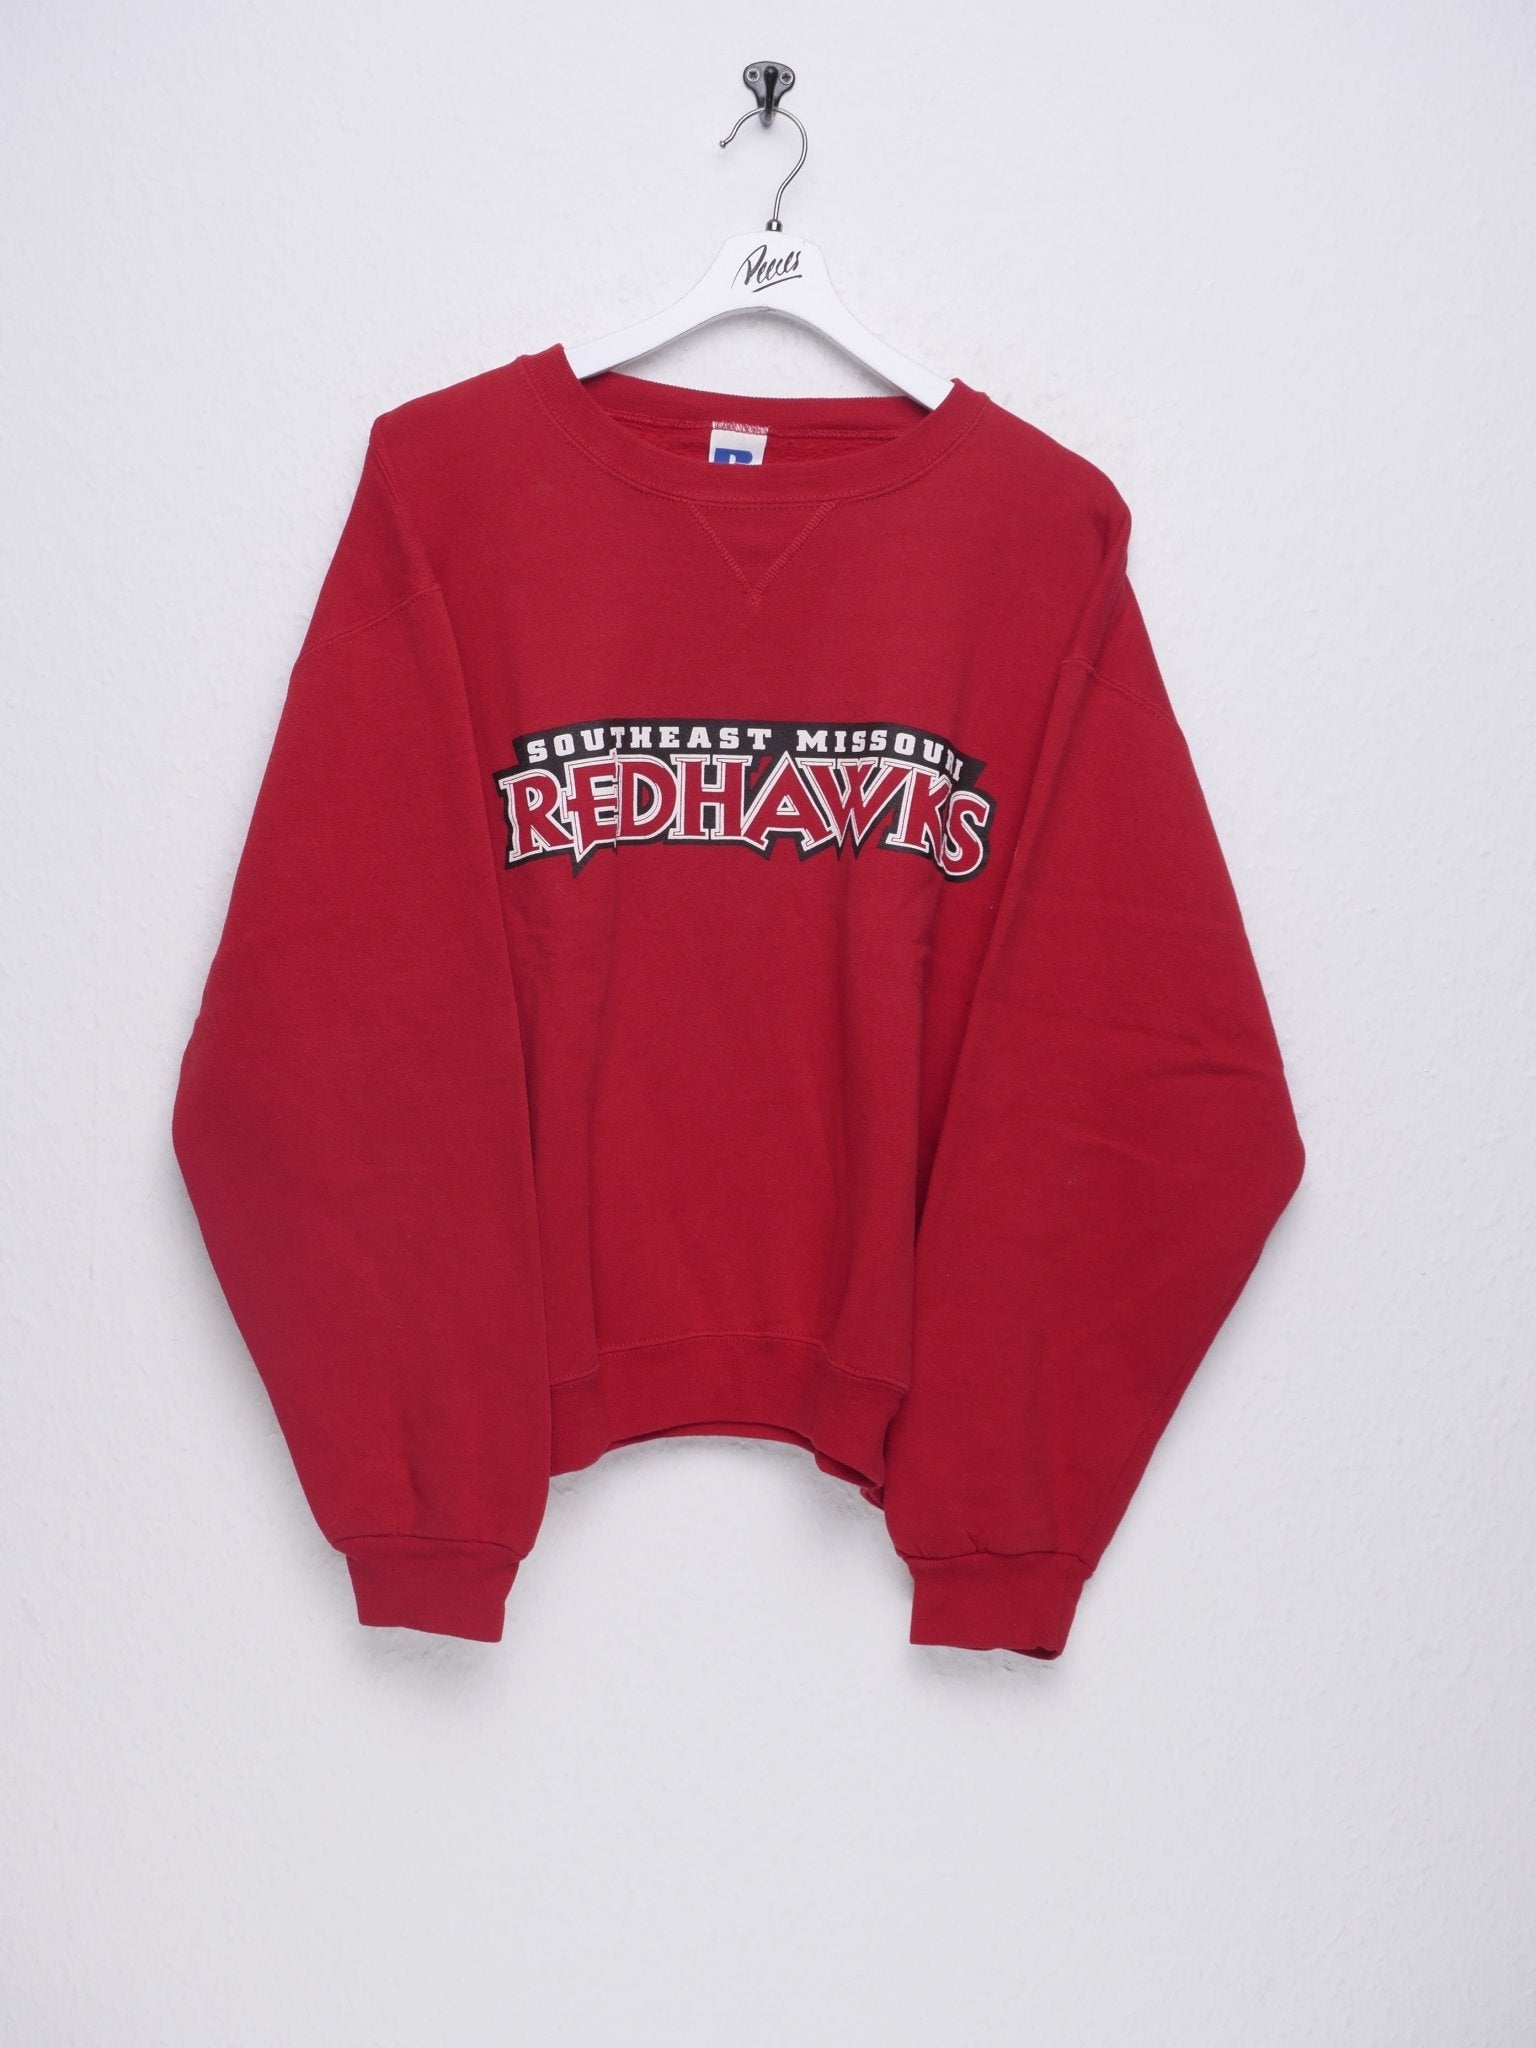 Russell Athletic Southeast Missouri Redhawks printed Spellout Vintage Sweater - Peeces